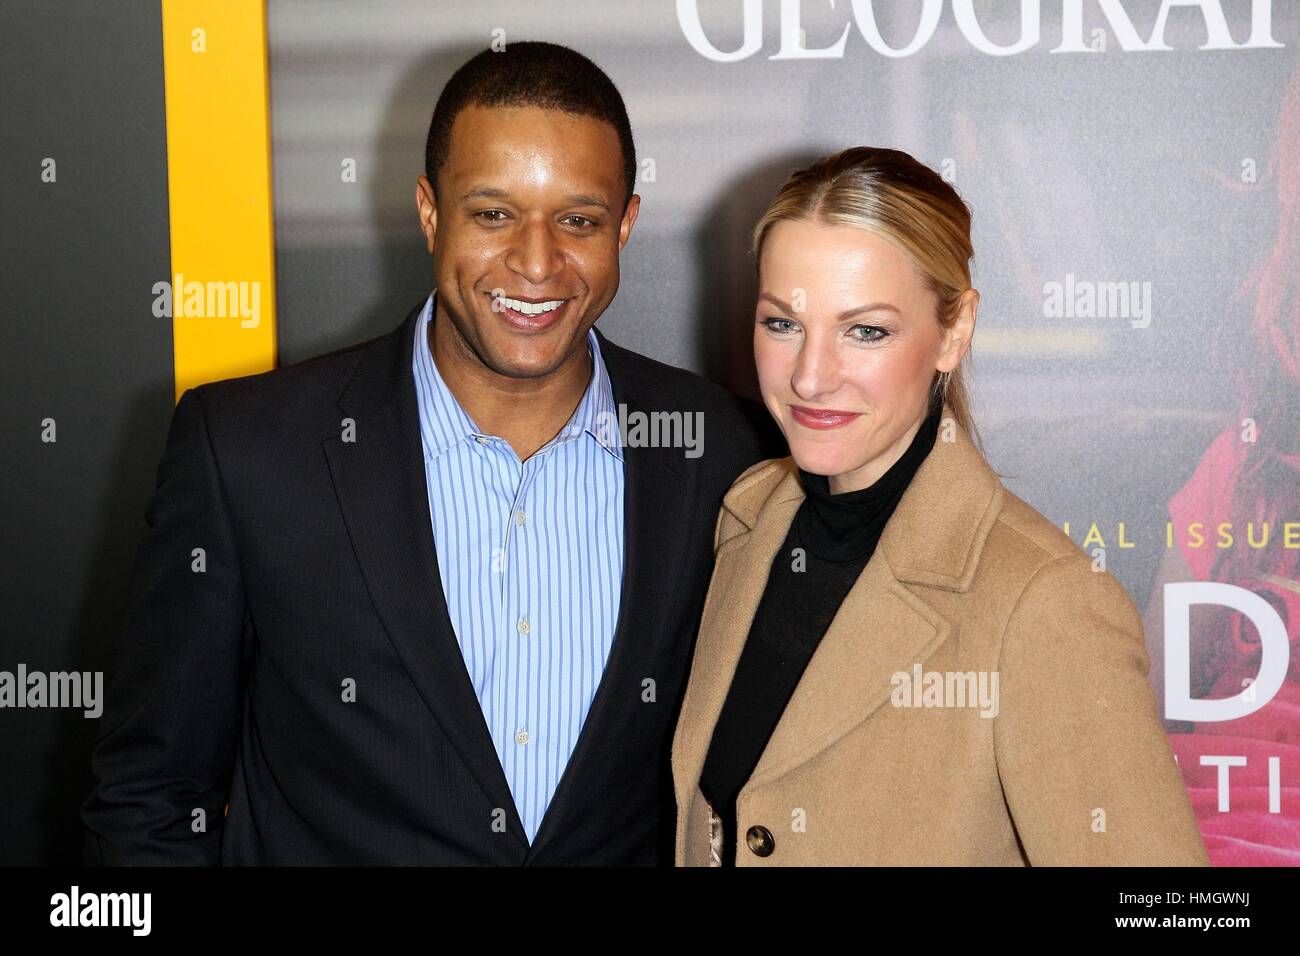 New York, NY, USA. 2nd Feb, 2017. Craig Melvin, Lindsay Czarniak at arrivals for GENDER REVOLUTION: A JOURNEY WITH KATIE COURIC Premiere on NATIONAL GEOGRAPHIC, The Times Center, New York, NY February 2, 2017. Credit: Steve Mack/Everett Collection/Alamy Live News Stock Photo